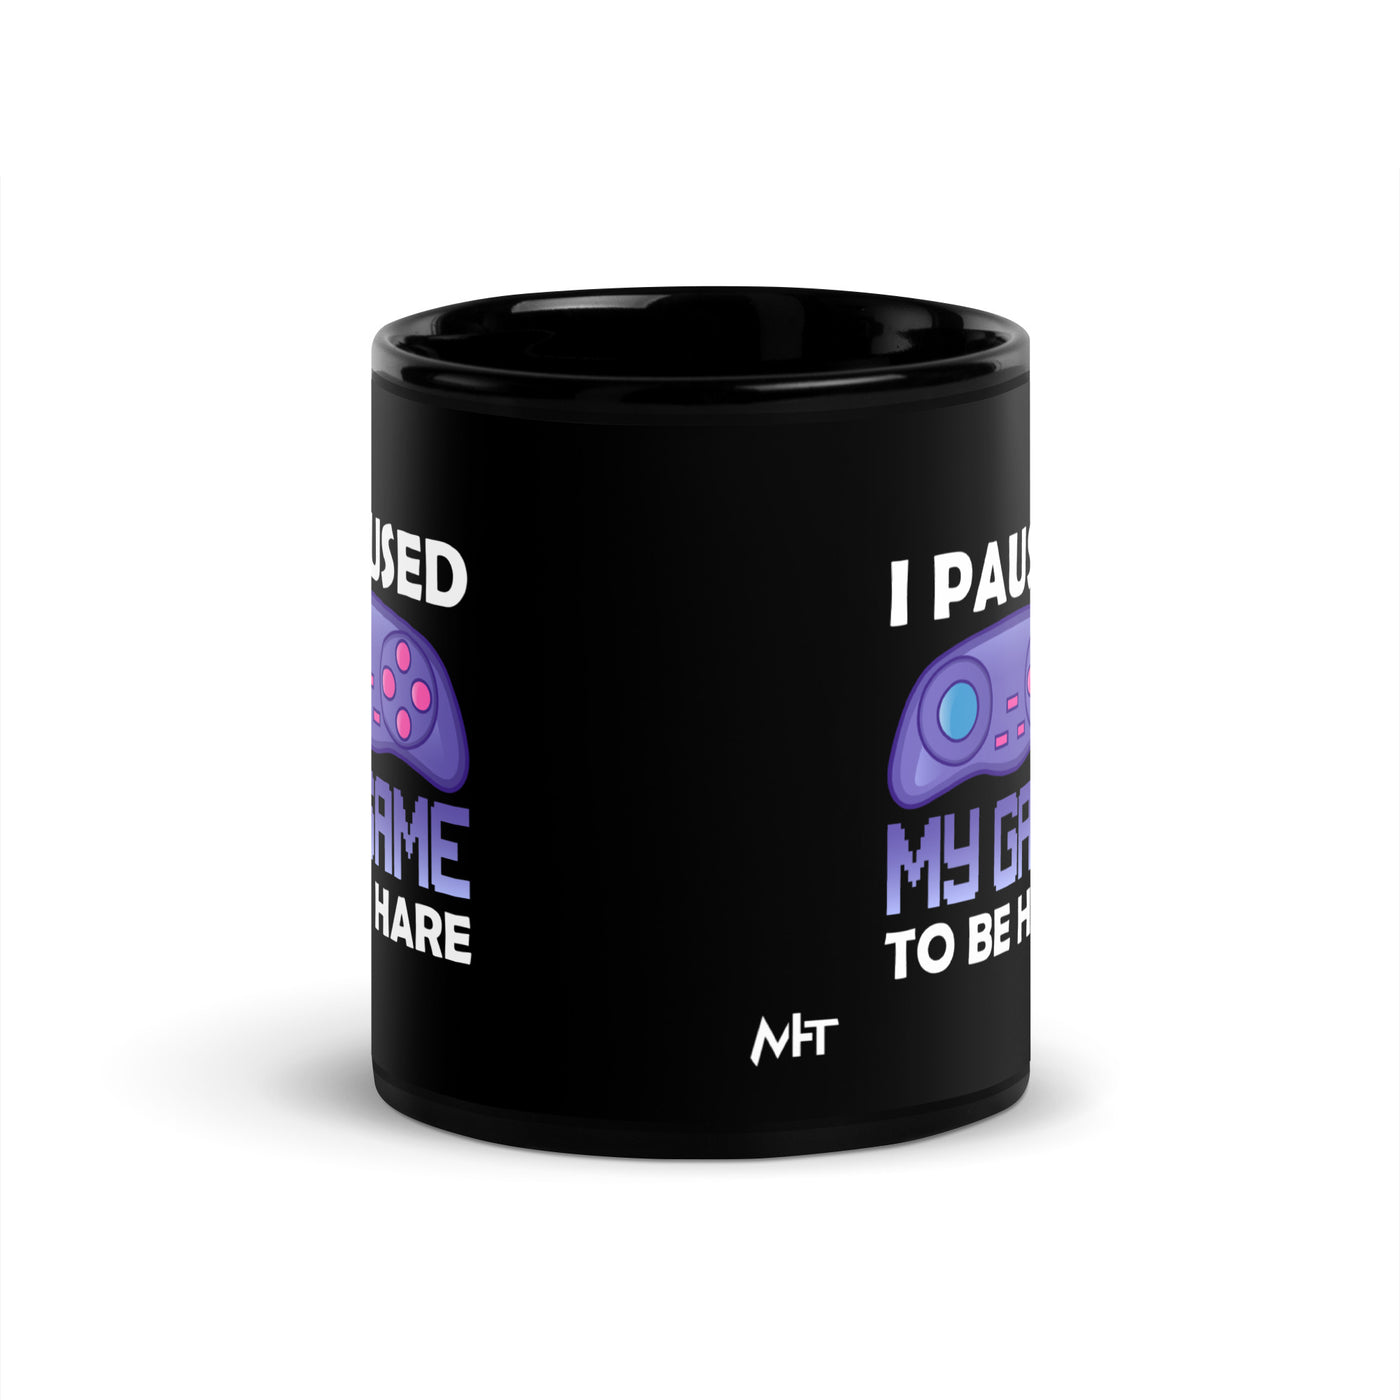 I Paused my Game to Be here (purple text ) - Black Glossy Mug